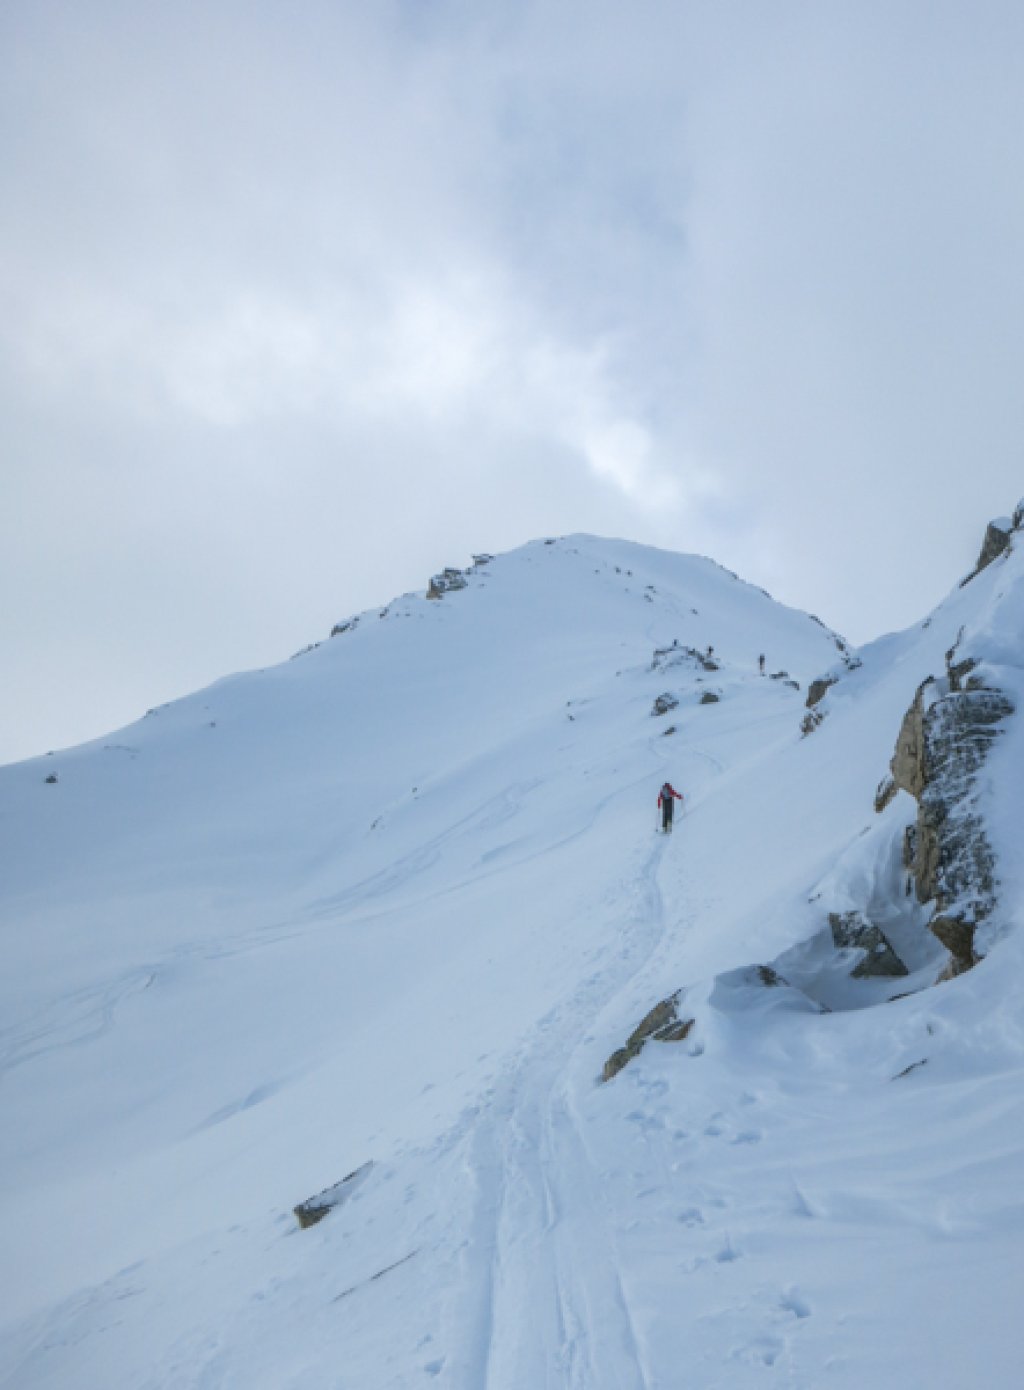 Ascent on the summit ridge where the normal route and the ascent route over the main slope meet